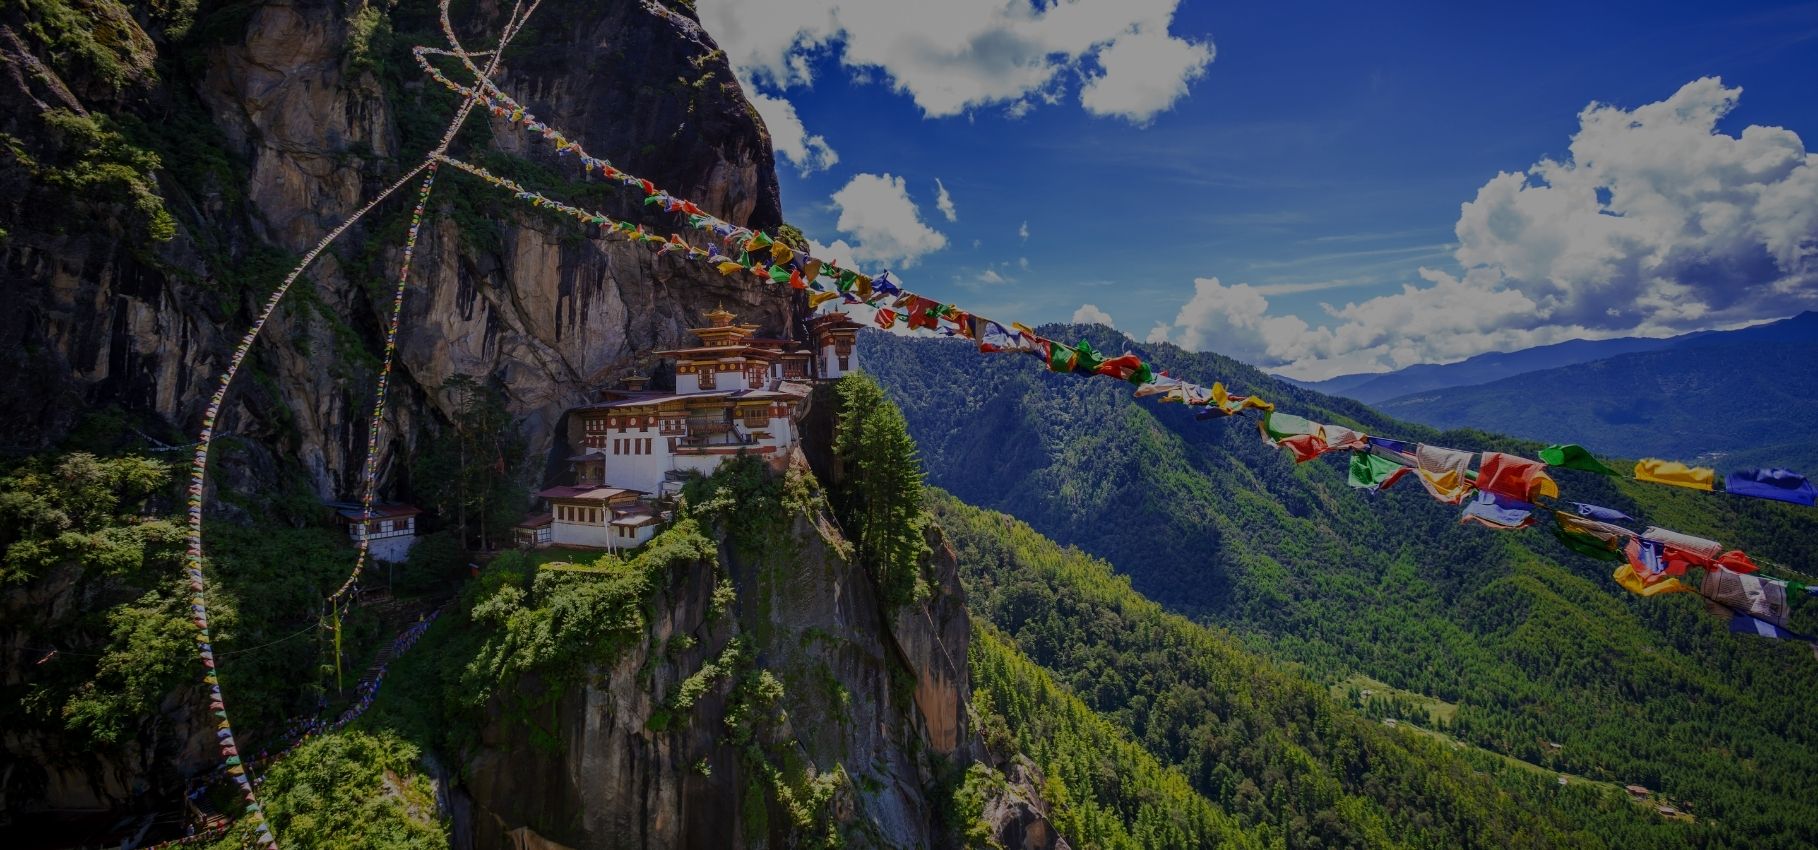 Visiting Taksang Monastery or Tiger's Nest in Paro, Bhutan